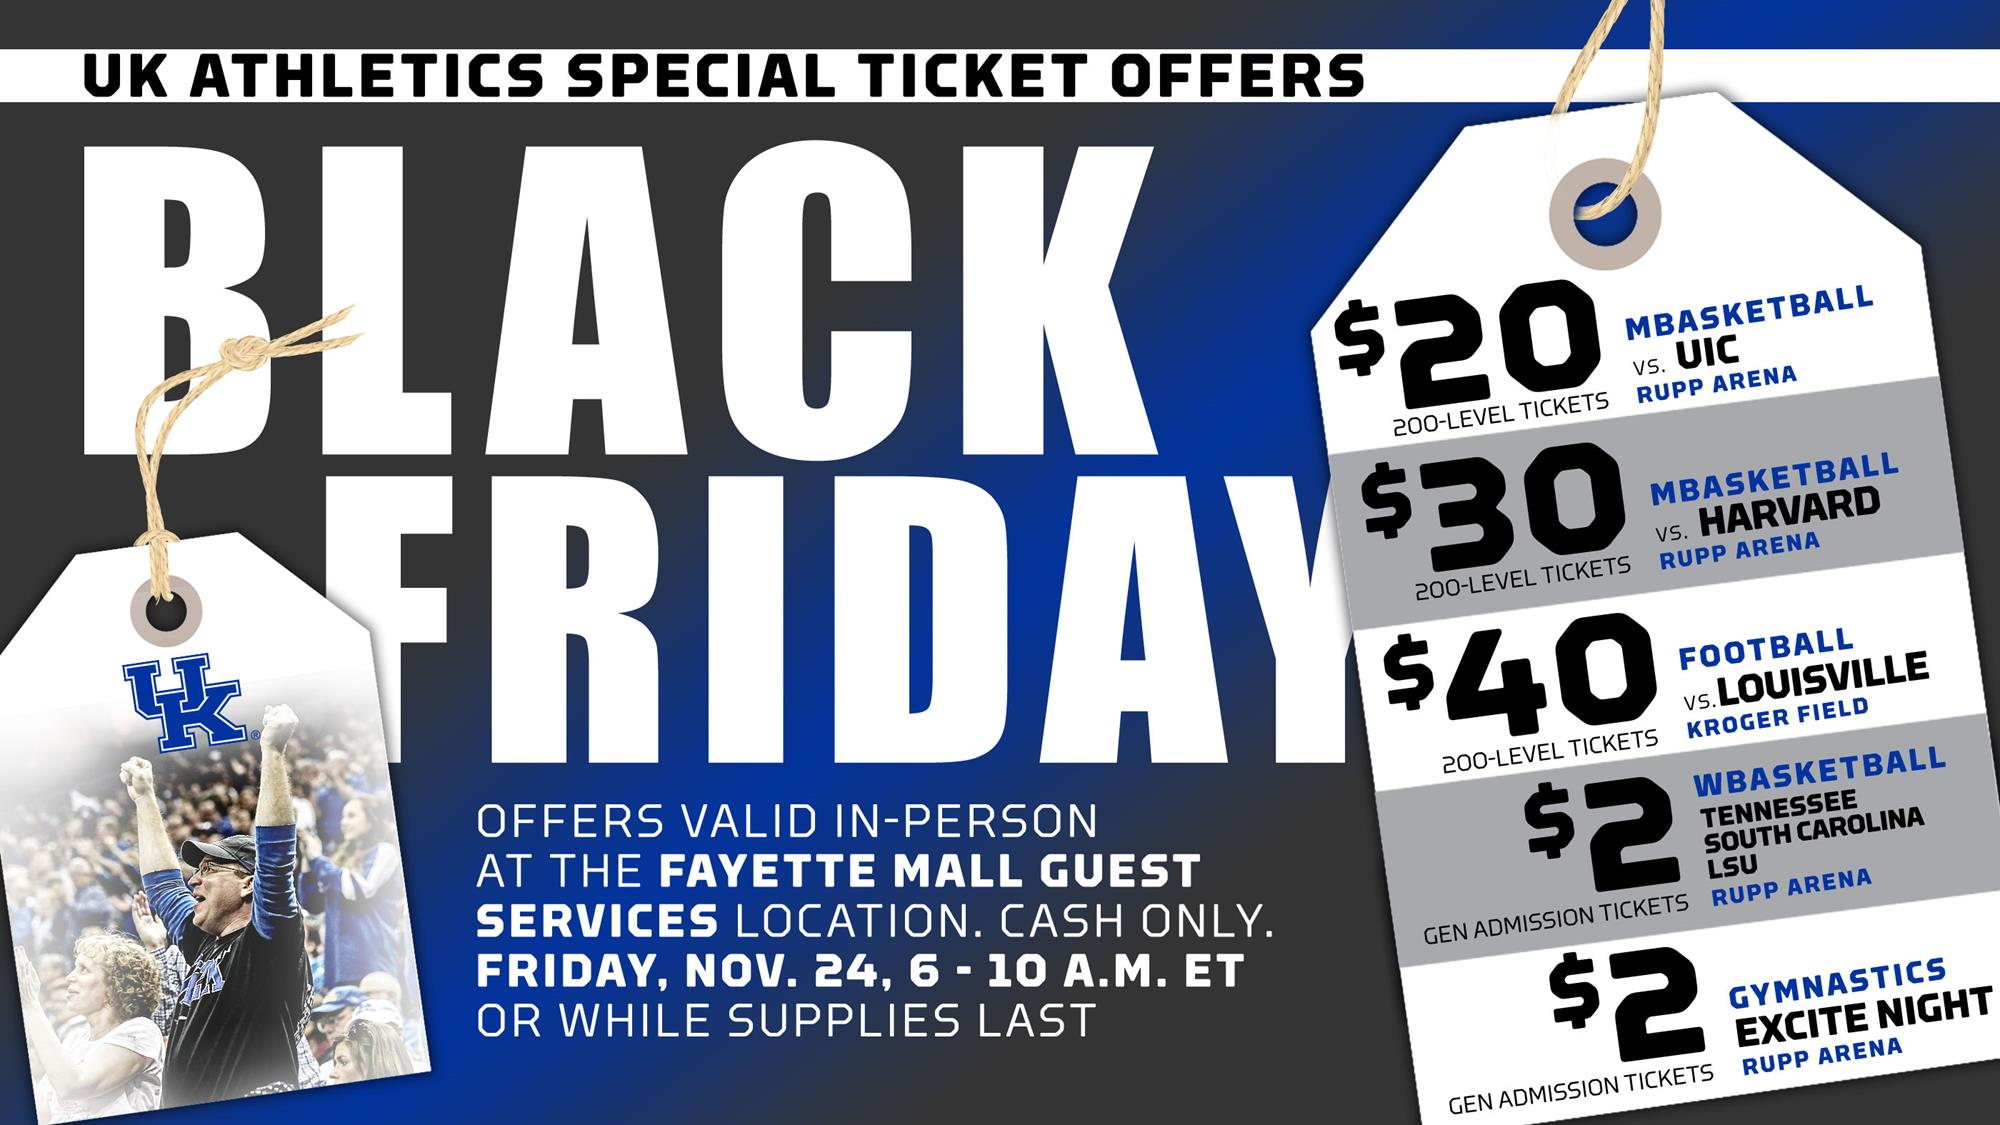 UK Athletics Offering Black Friday Ticket Deals at Fayette Mall